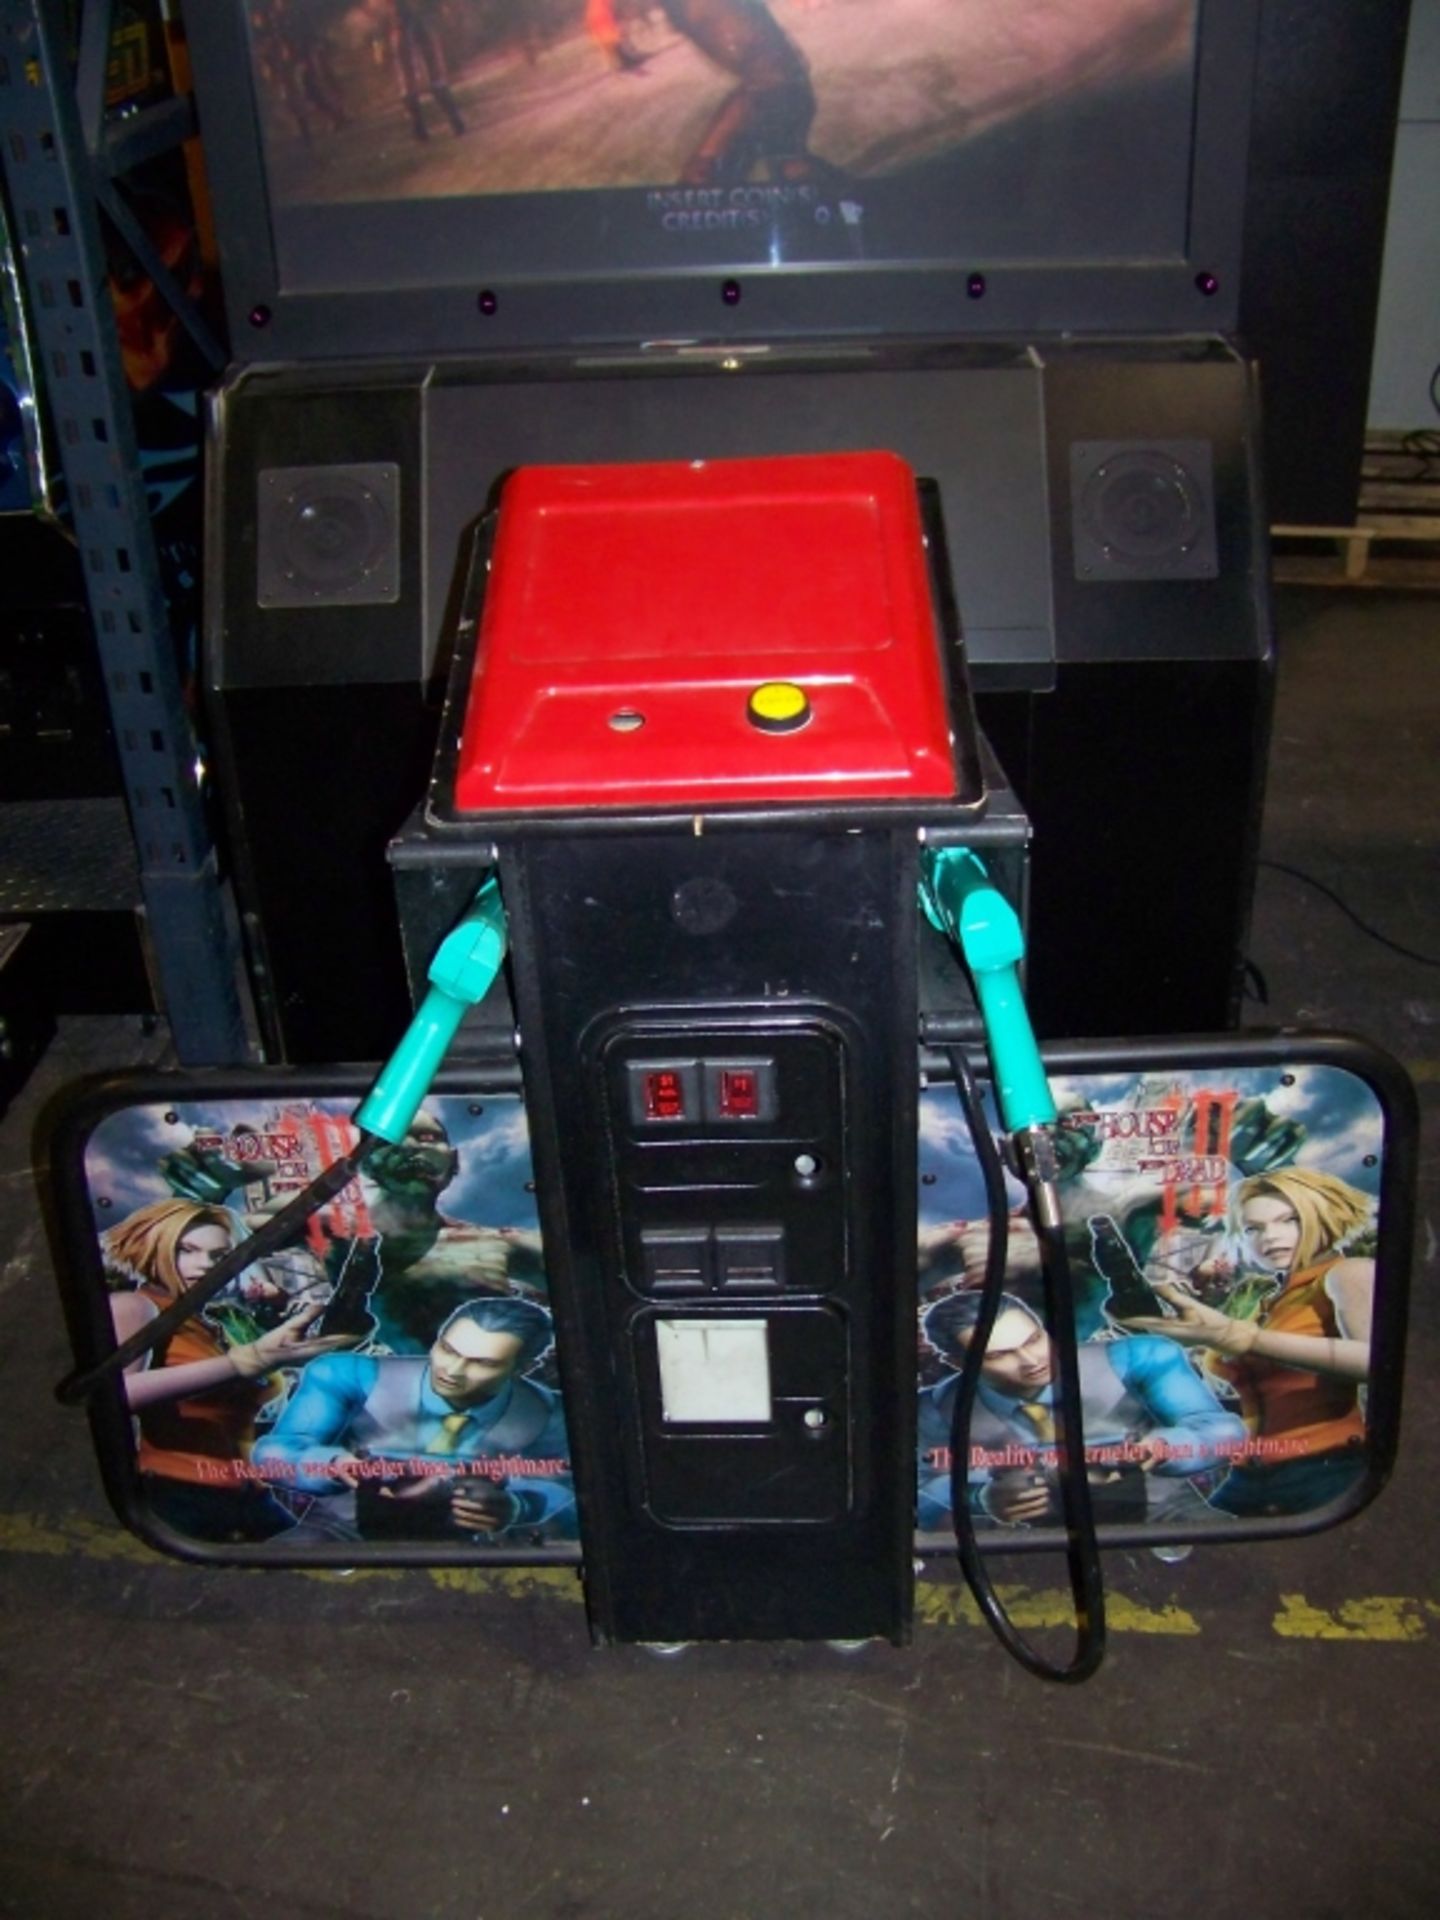 HOUSE OF THE DEAD III DELUXE 50" ZOMBIE ARCADE - Image 5 of 6